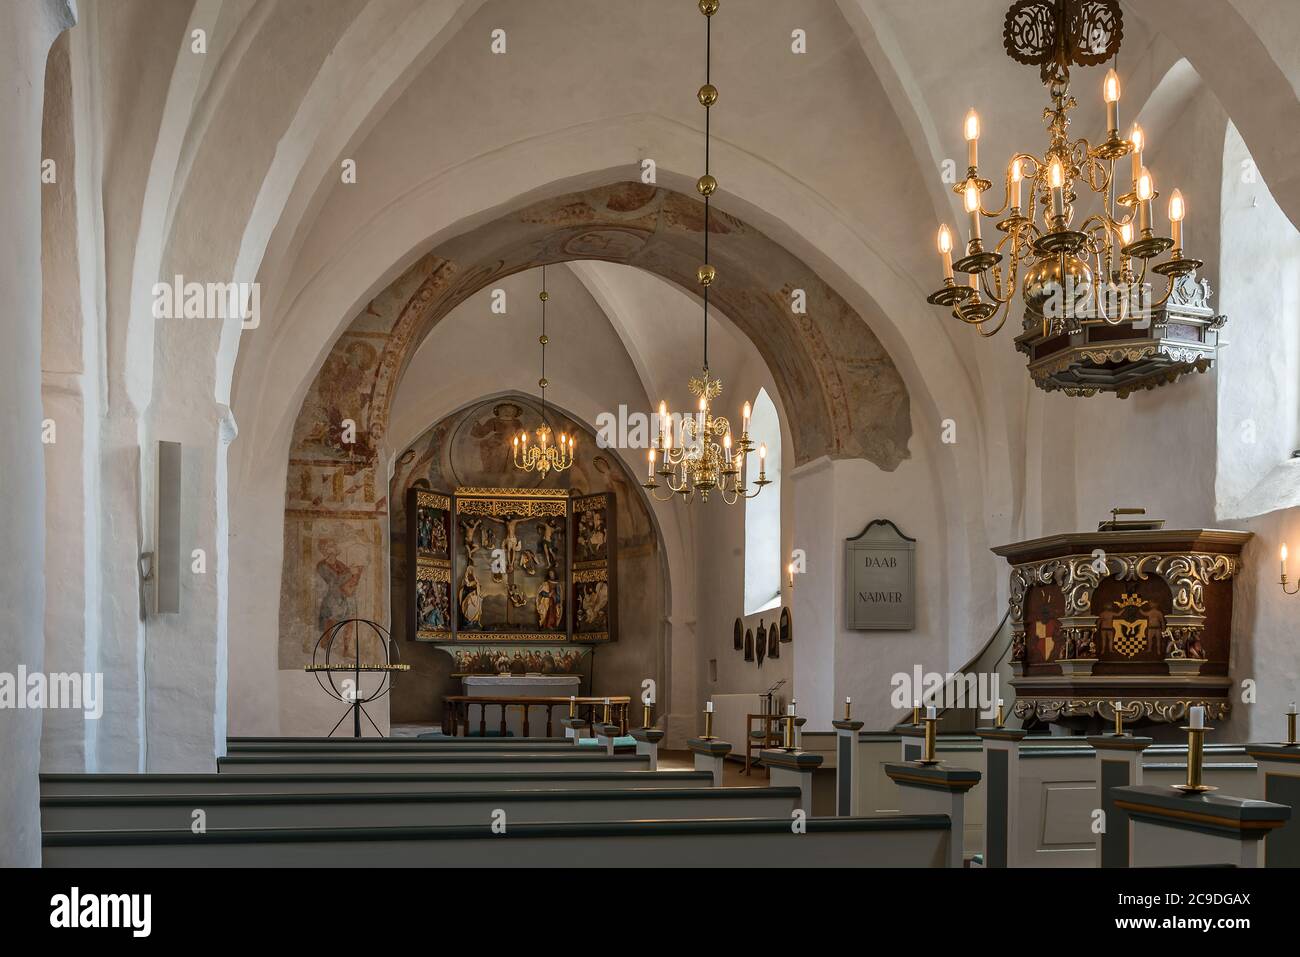 interior of an medeival danish church with glowing chandeliers, Hagested, Denmark, July 16, 2020 Stock Photo